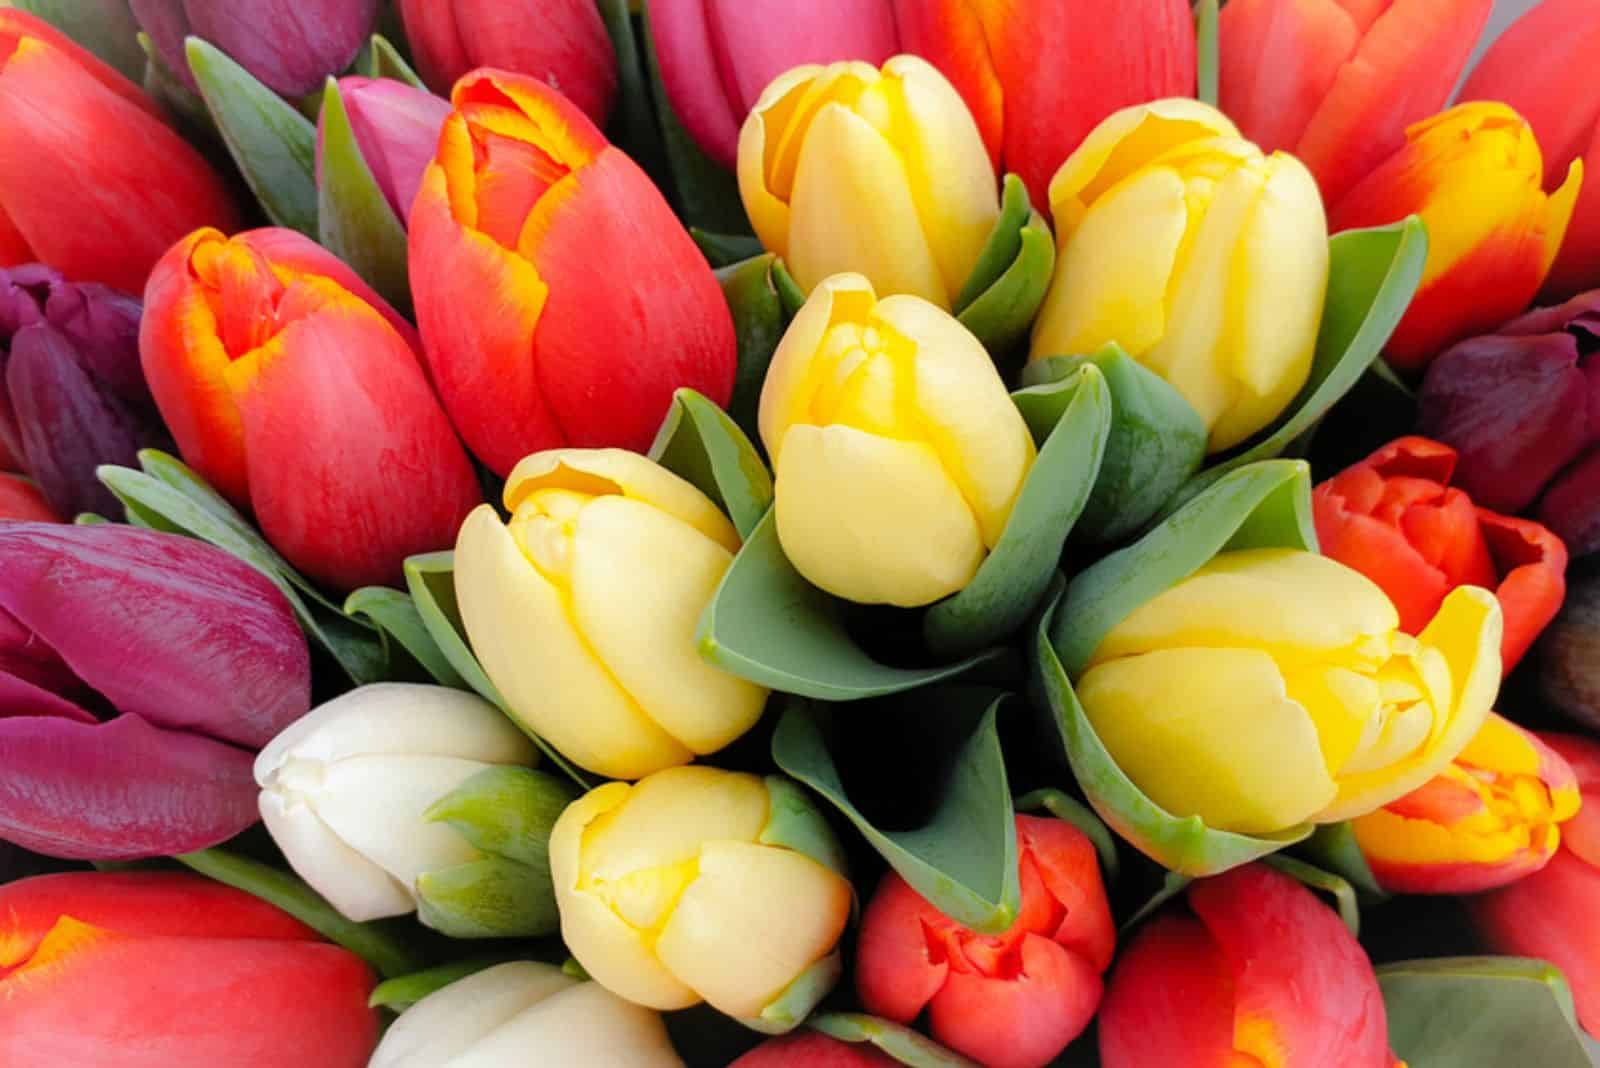 What’s The Popular Tulip Color Meaning And Symbolism?